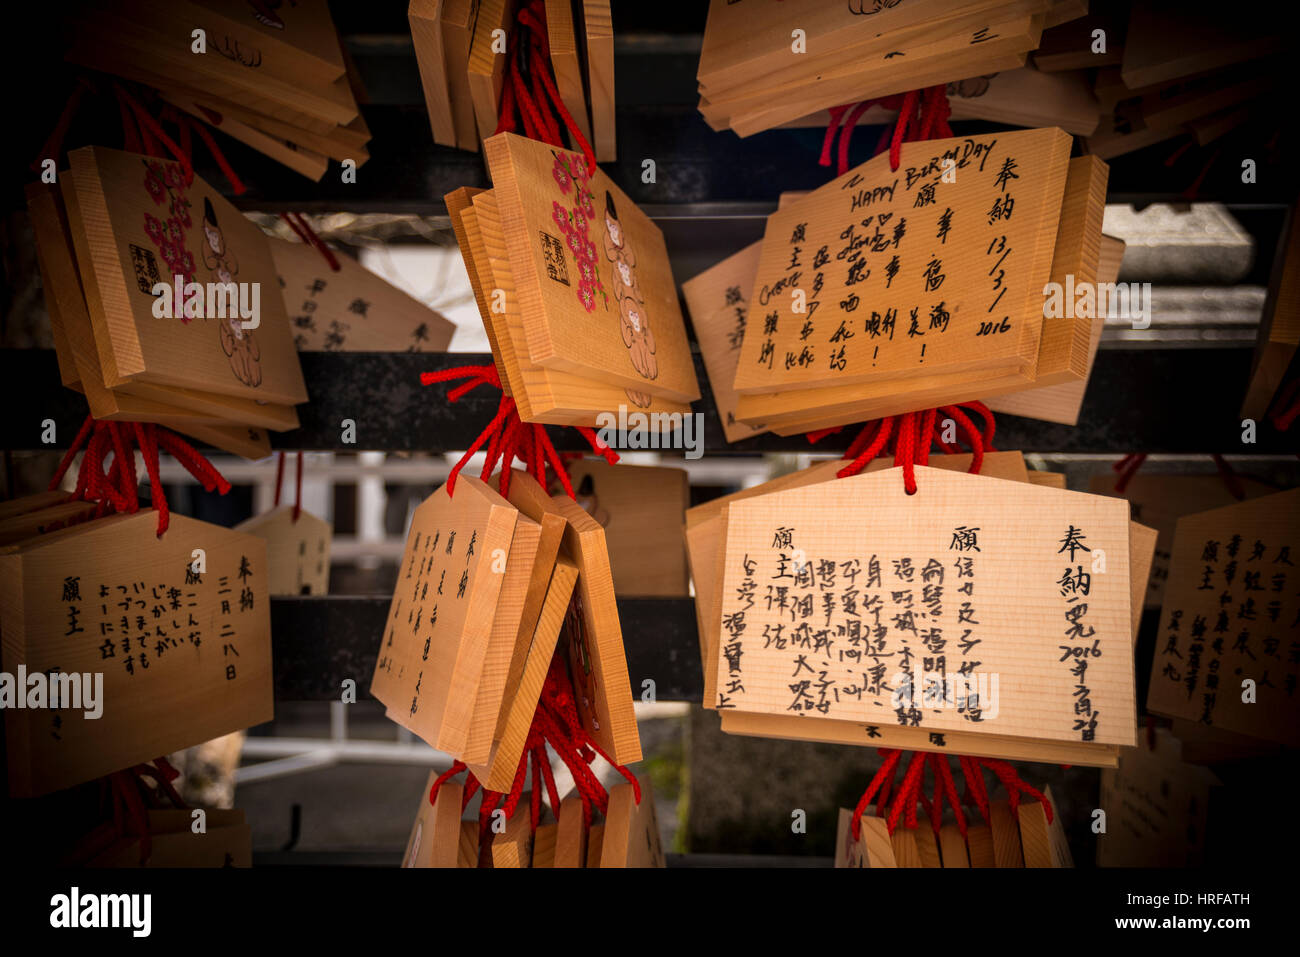 Ema, Small wooden plaques with prayers and wishes, Kiyomizu dera, Buddhist Temple, in Kyoto, Japan Stock Photo